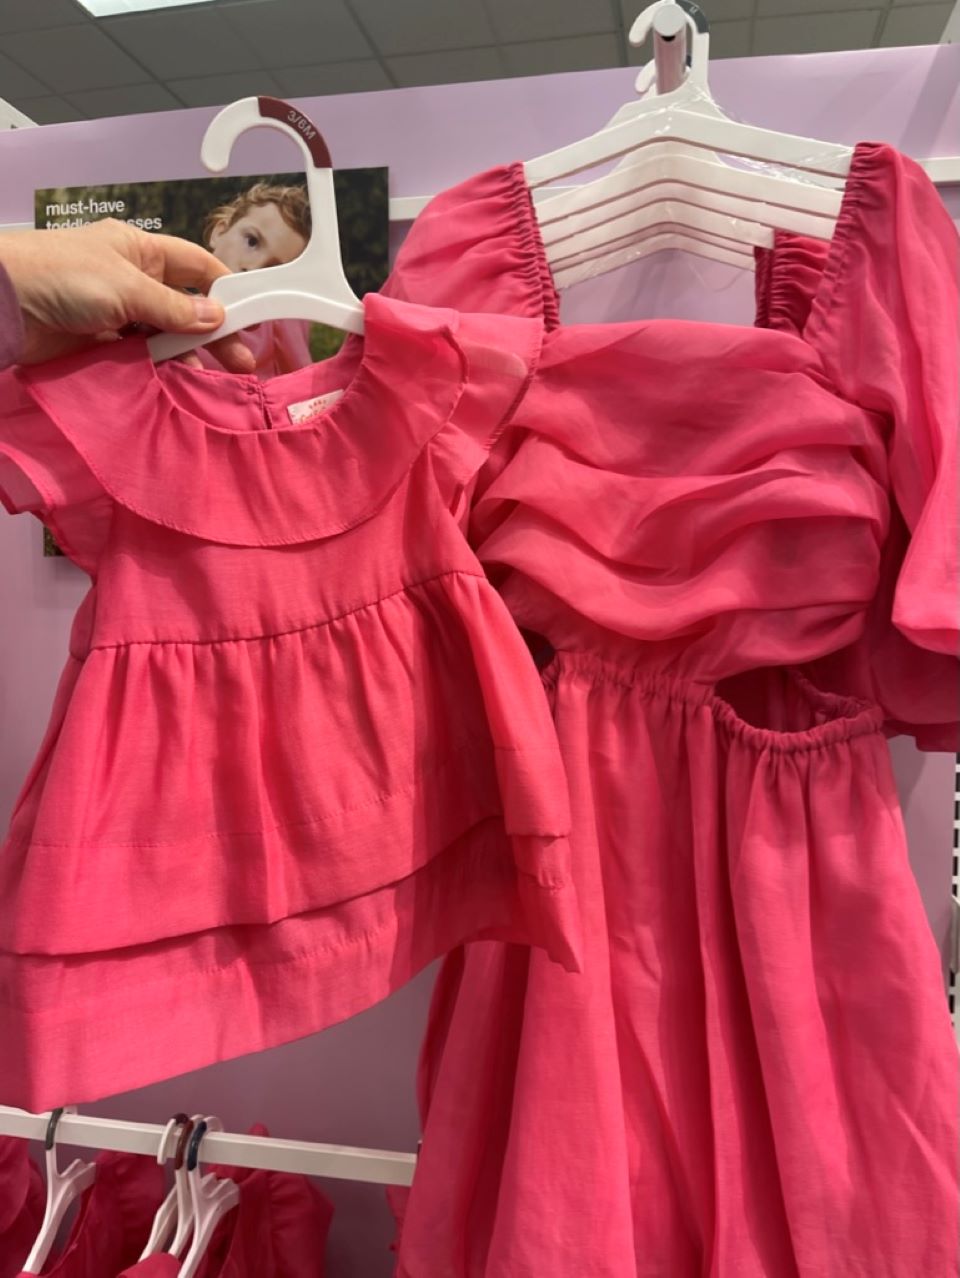 Hand holding a dress on a pink hanger next to another dress on a hanger